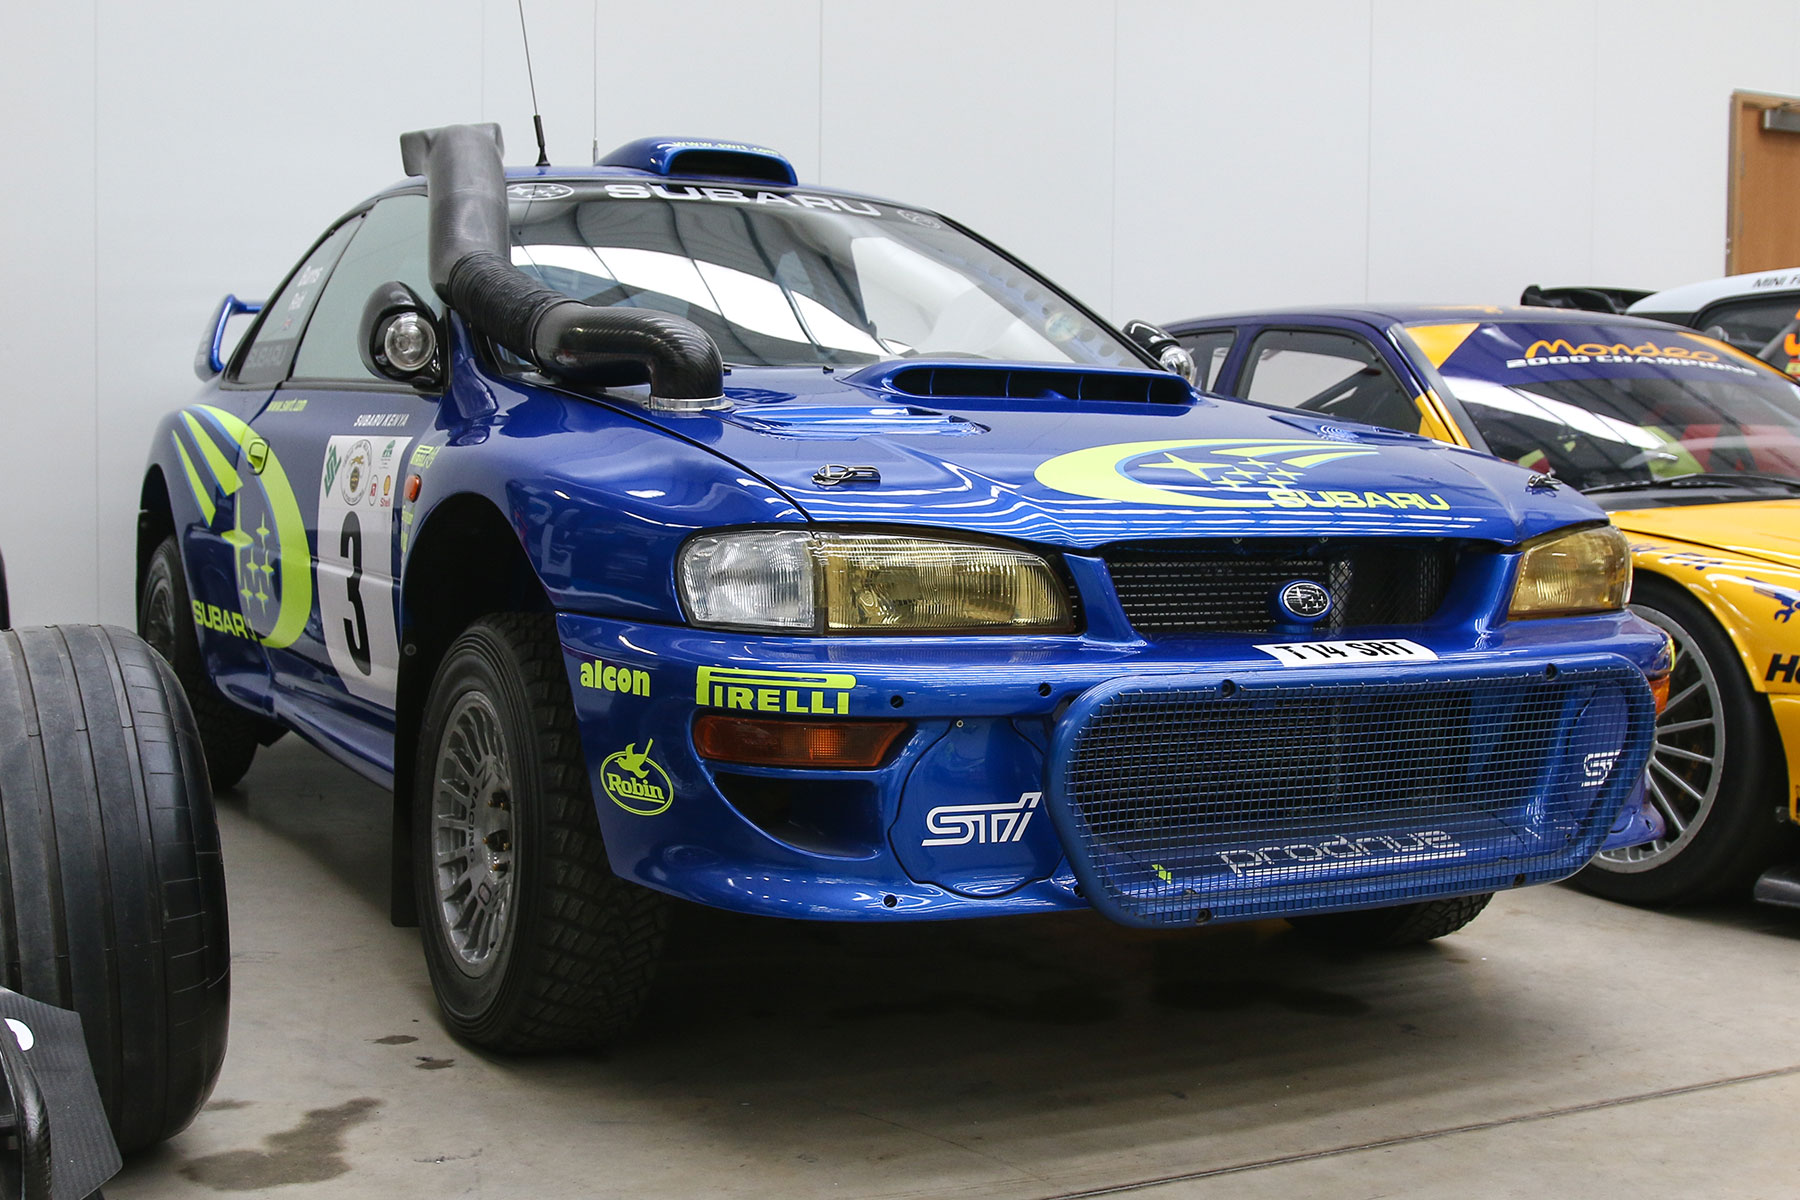 Video: Prodrive’s amazing race and rally car collection